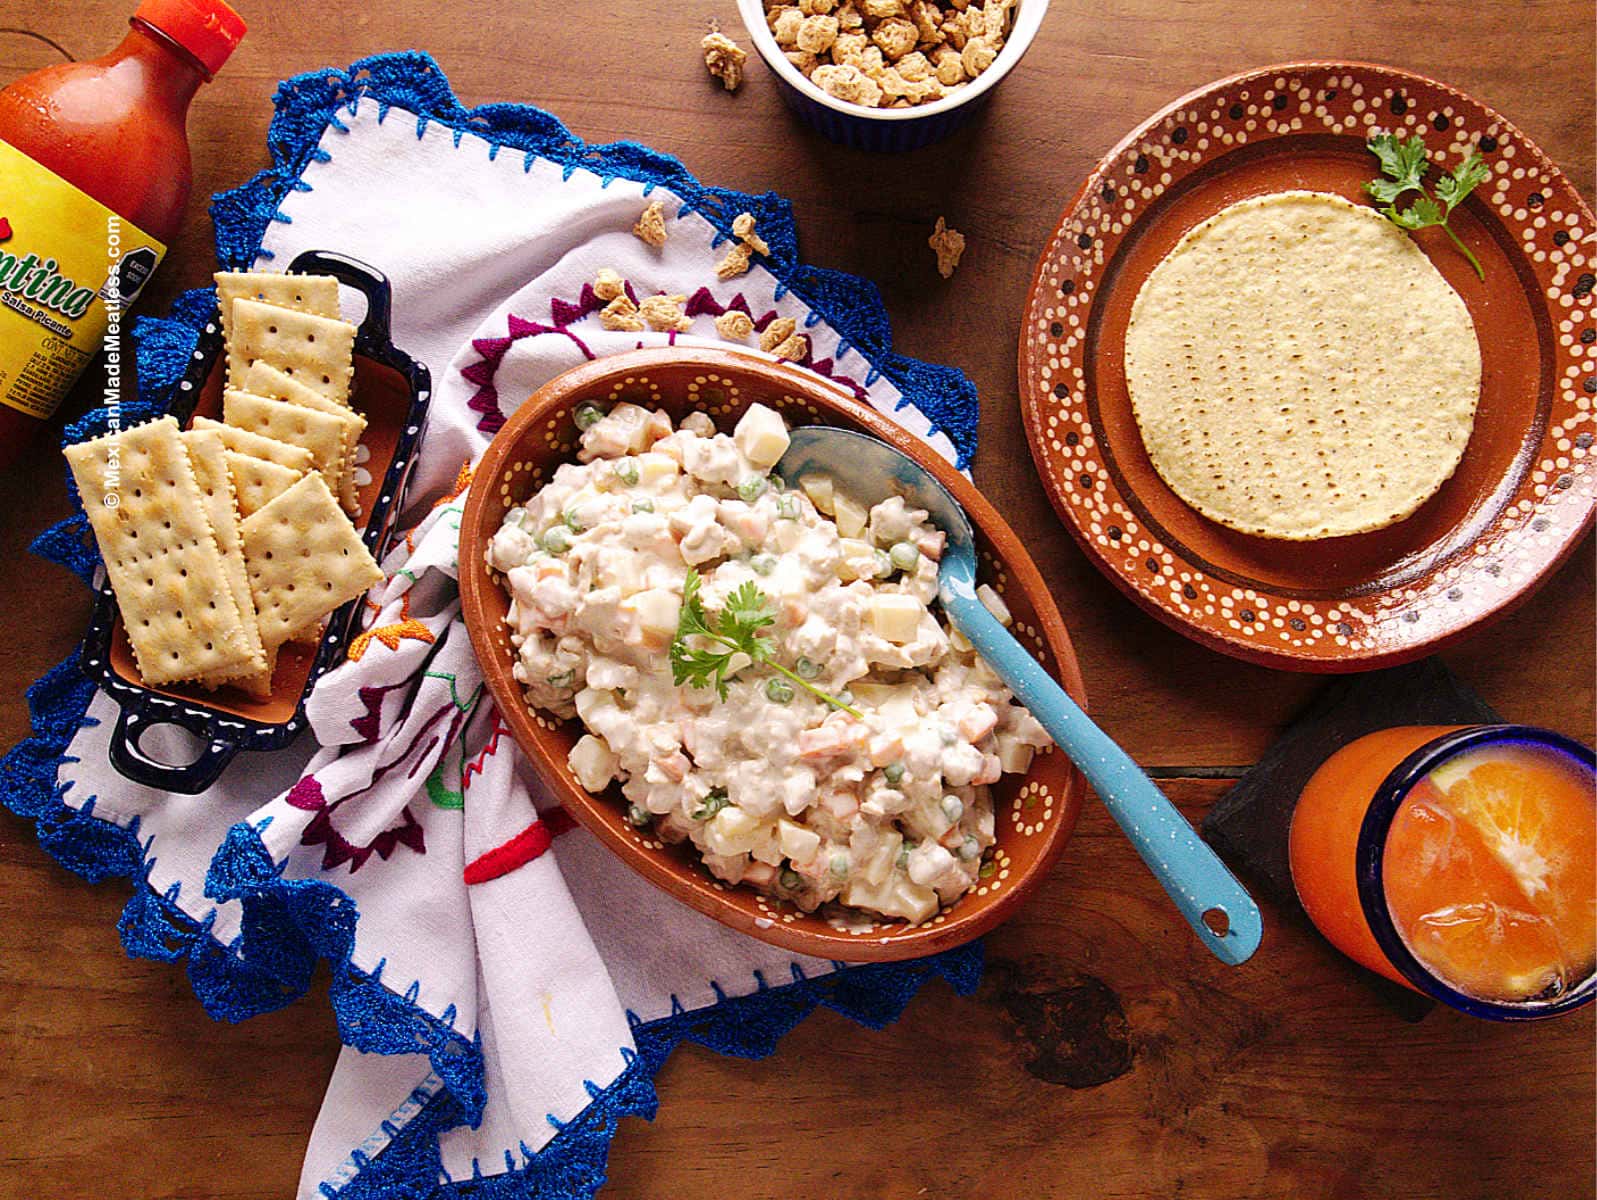 Mexican chicken salad made inside an earthenware bowl with tostada shells and saltine crackers on the side.